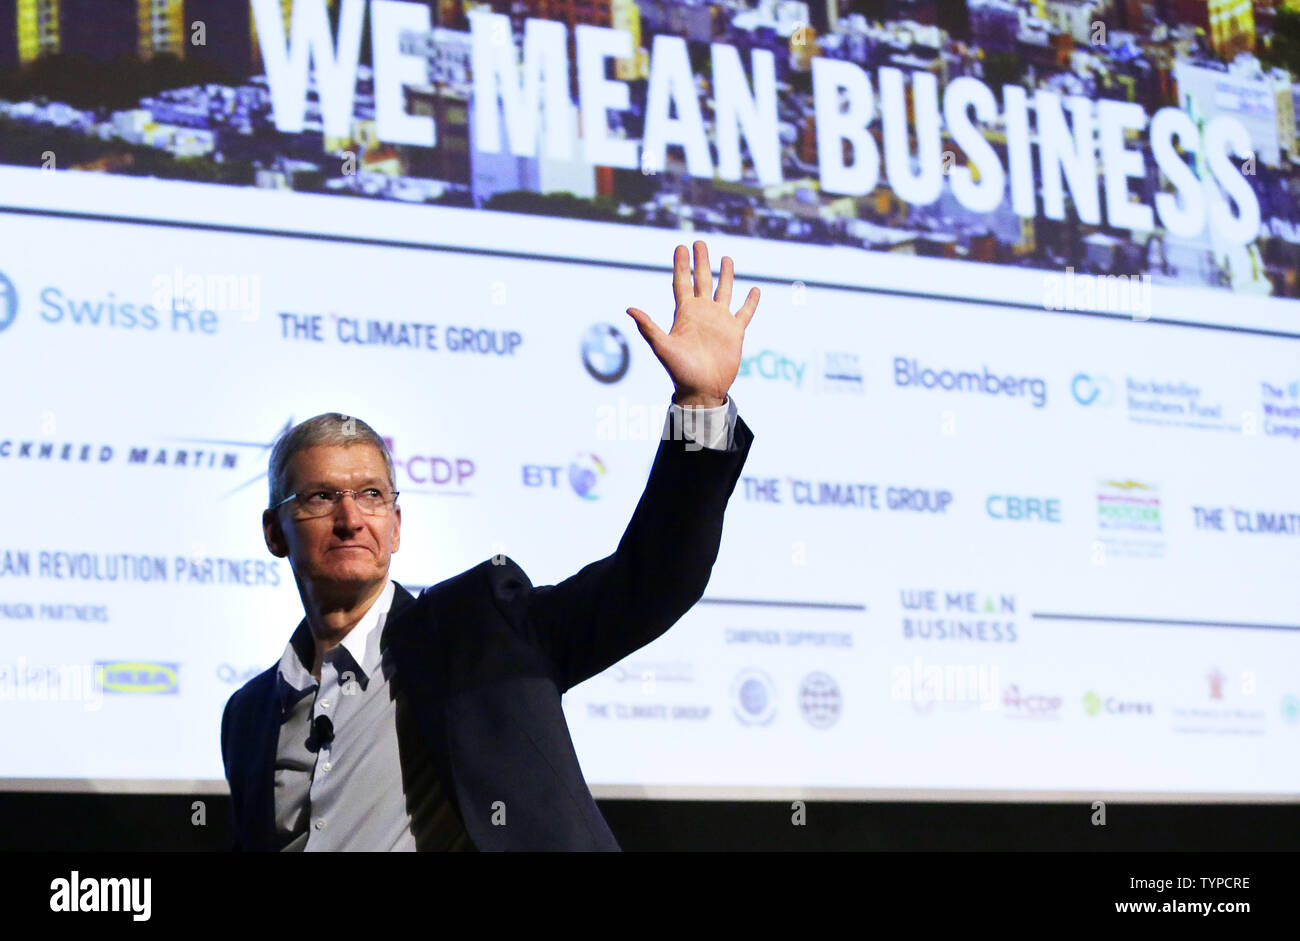 Apple CEO Tim Cook waves after speaking at a 'Climate Week NYC' event at the Morgan Library and Museum in New York City on September 22, 2014. 'Climate Week NYC' events are scheduled to continue through Sunday, September 28 and coincide with the U.N.'s 2014 Climate Summit.     UPI/John Angelillo Stock Photo